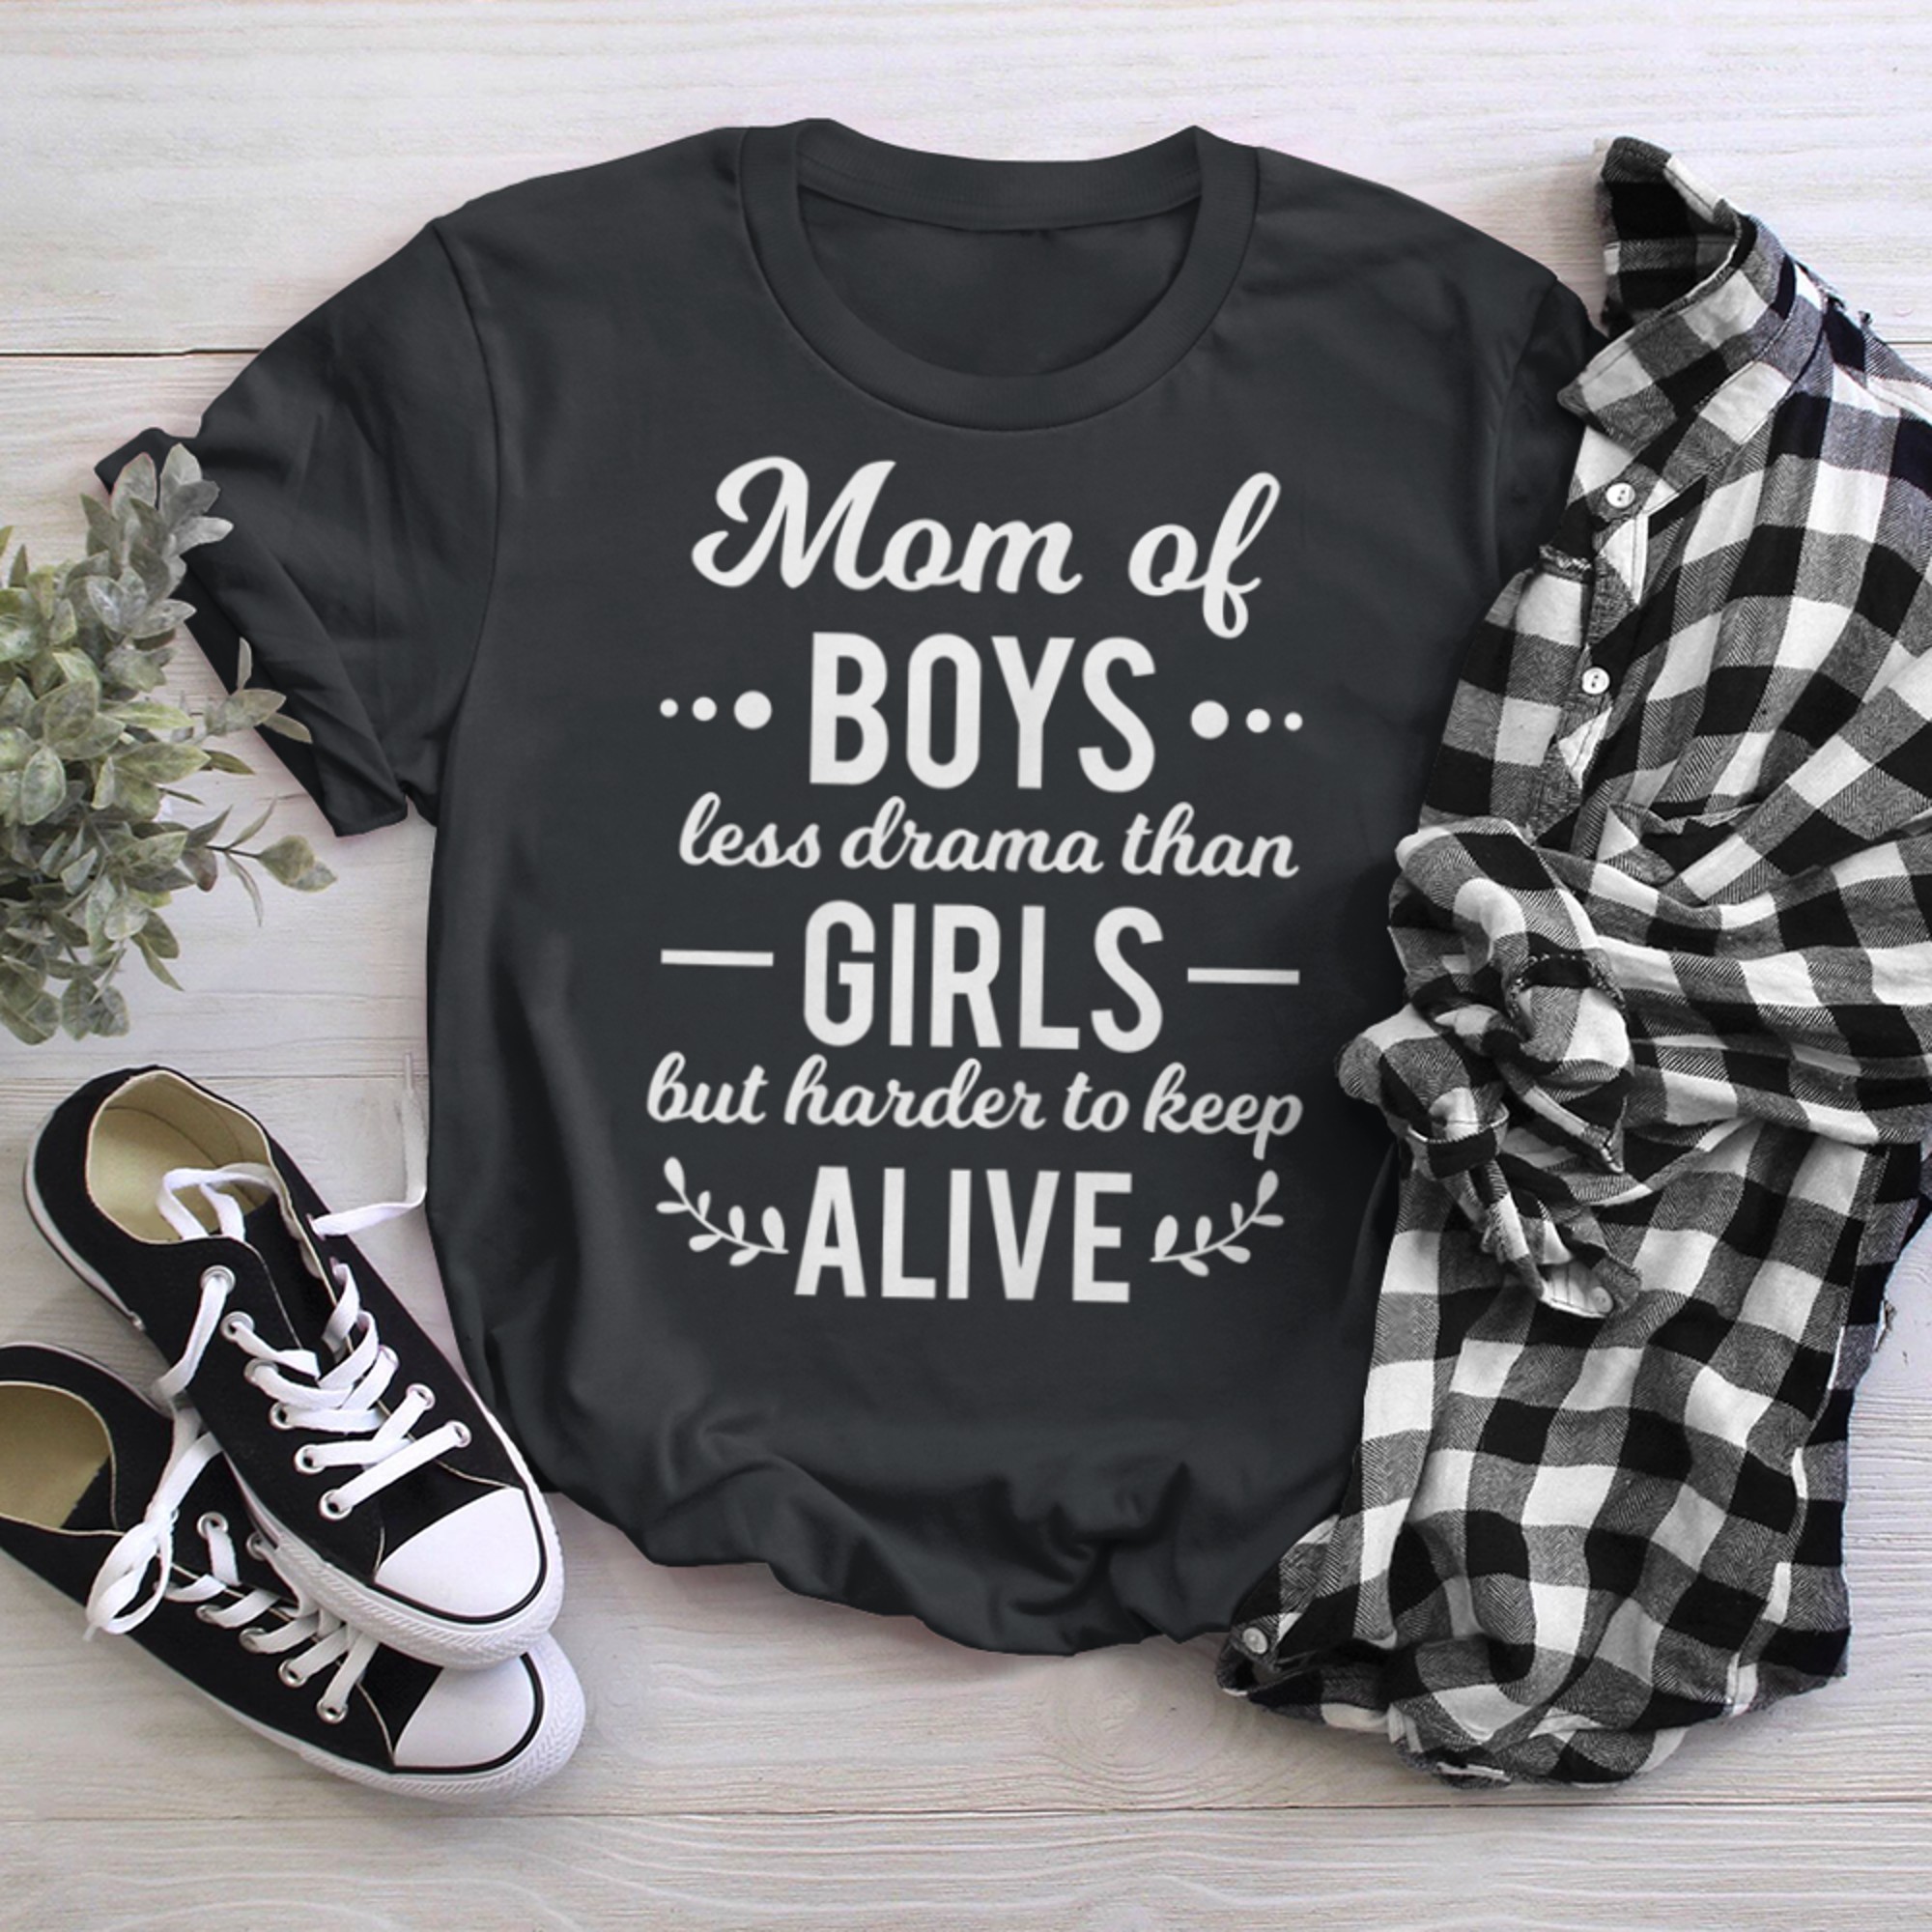 mom of less drama than but harder to keep alive (2) t-shirt black